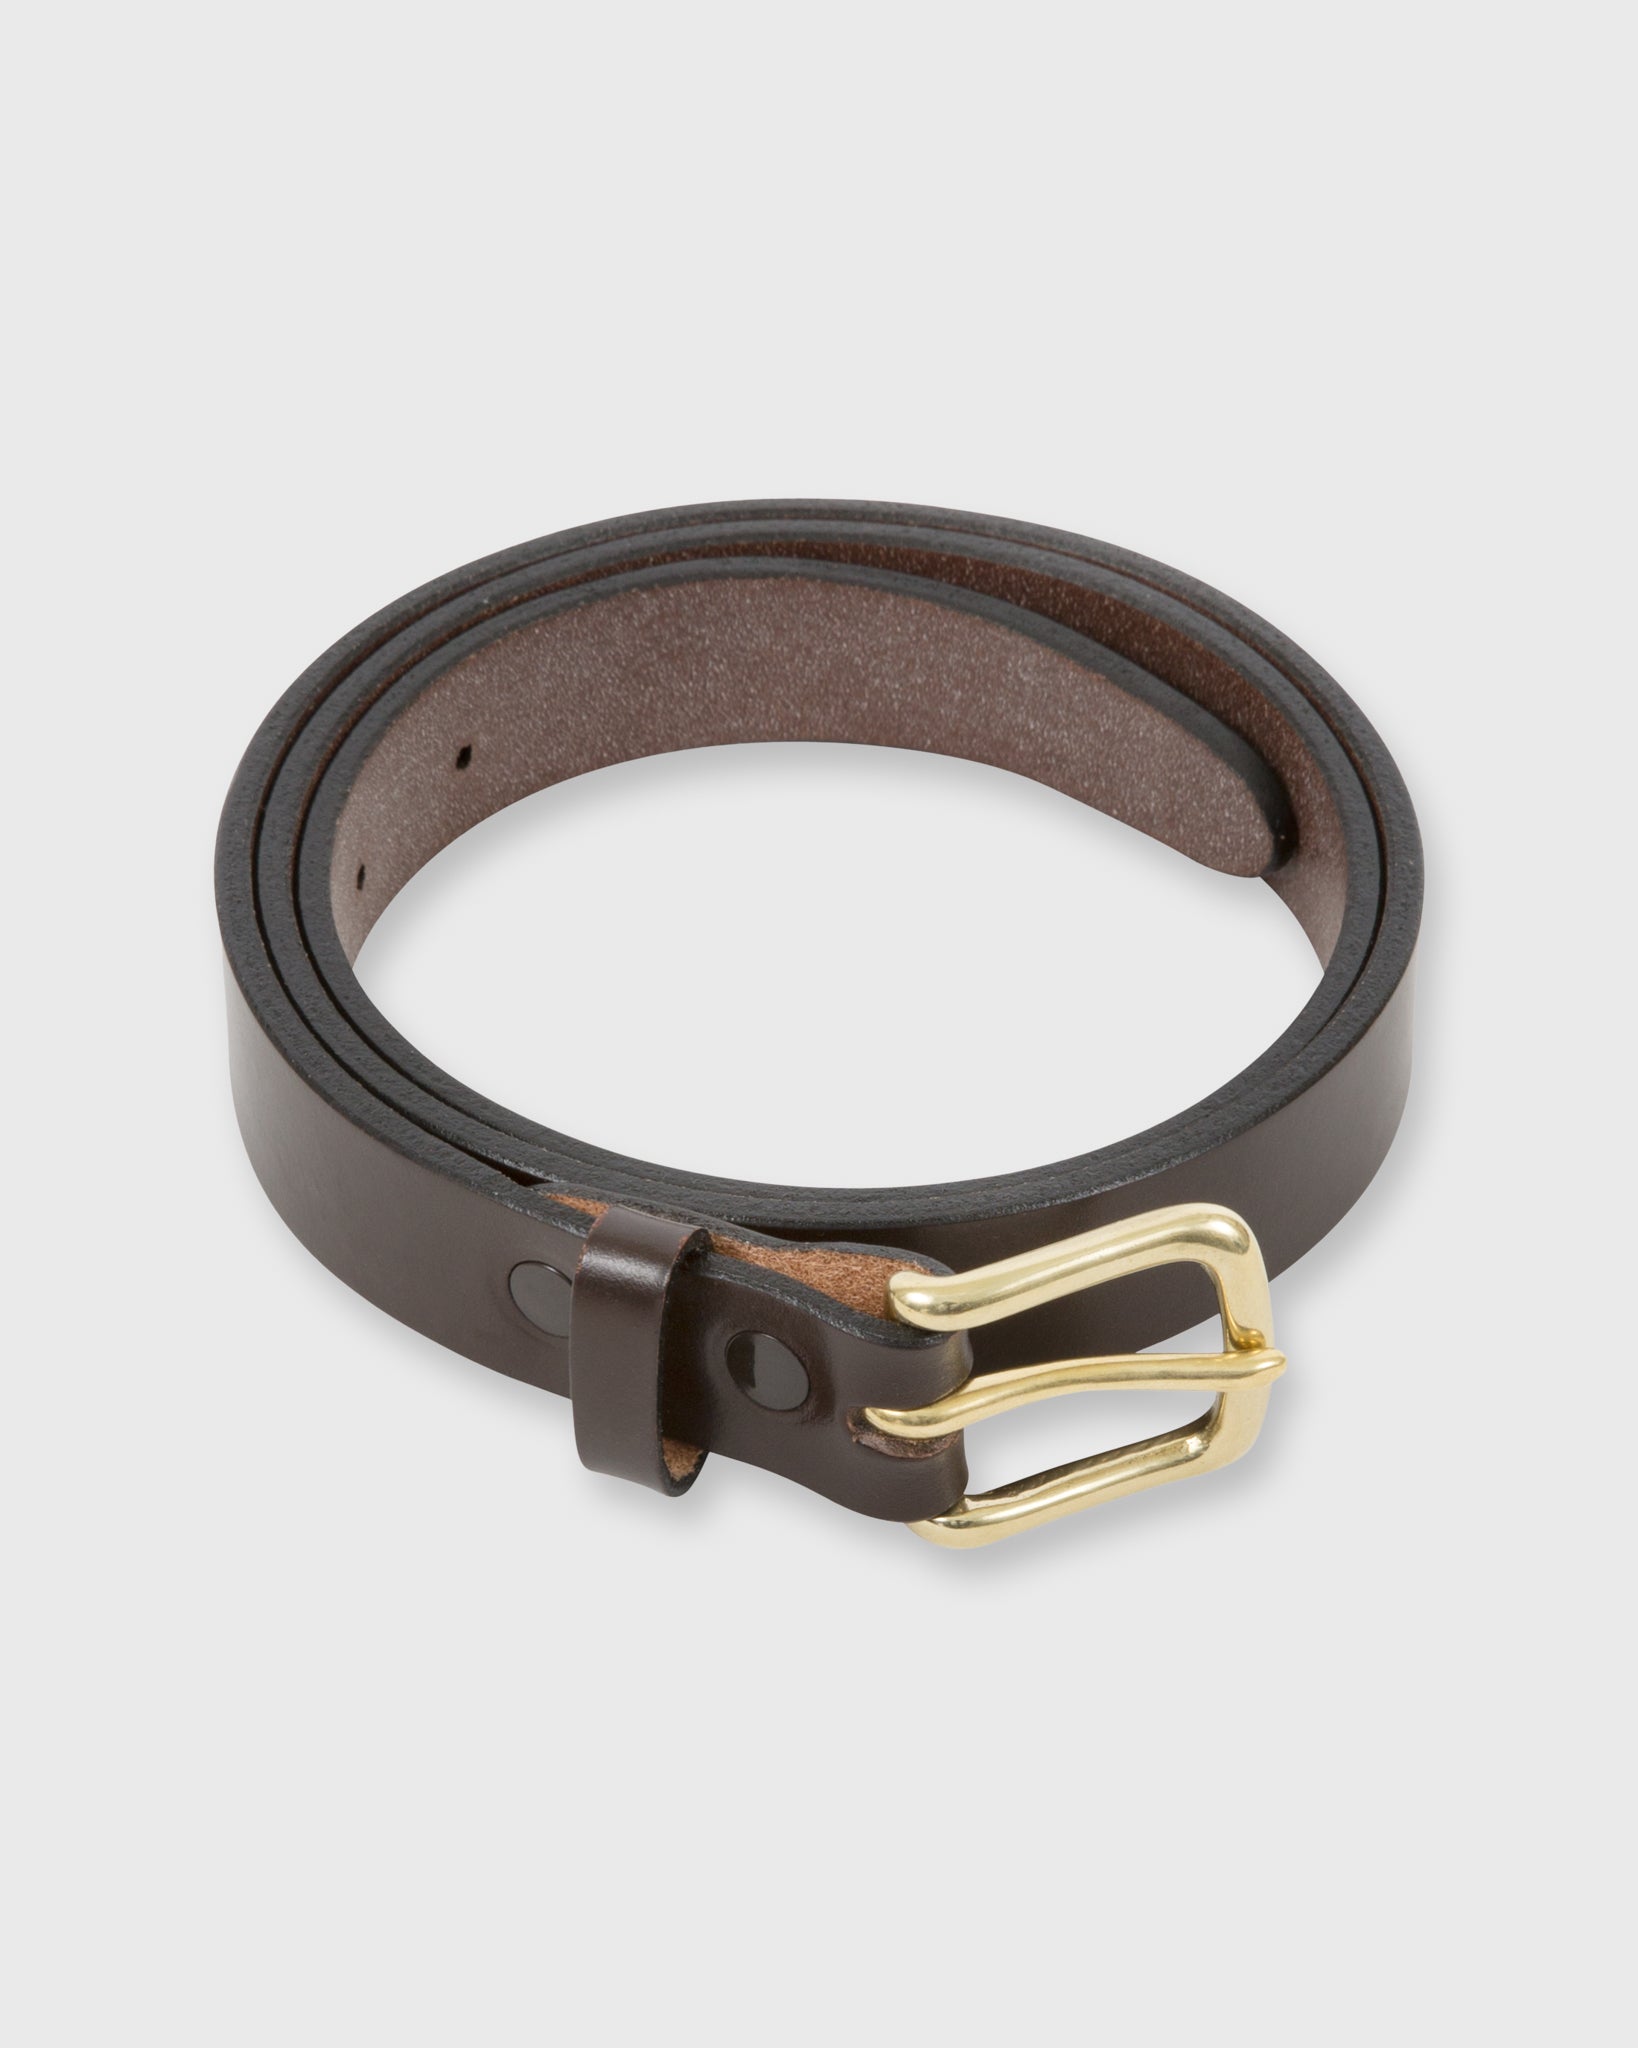 1" Belt in Chocolate Bridle